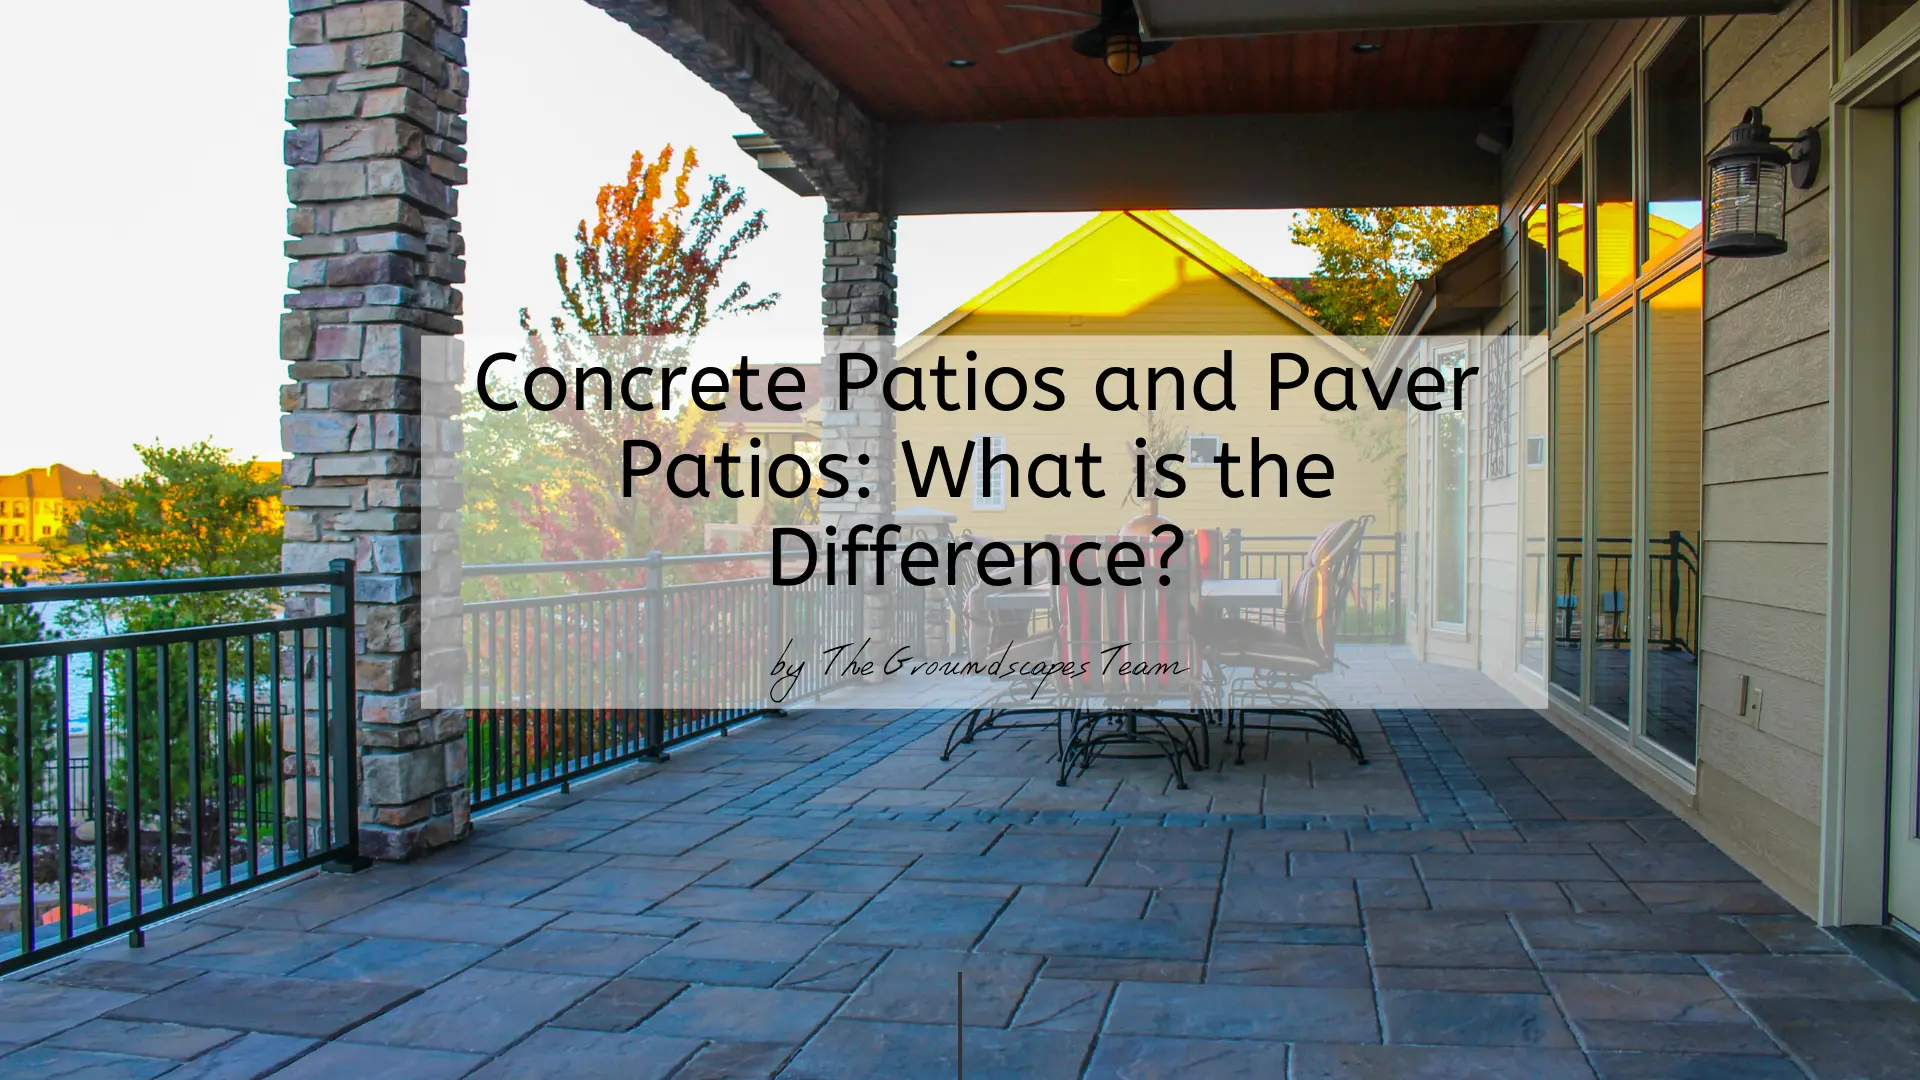 Concrete Patios and Paver Patios: What is the Difference?